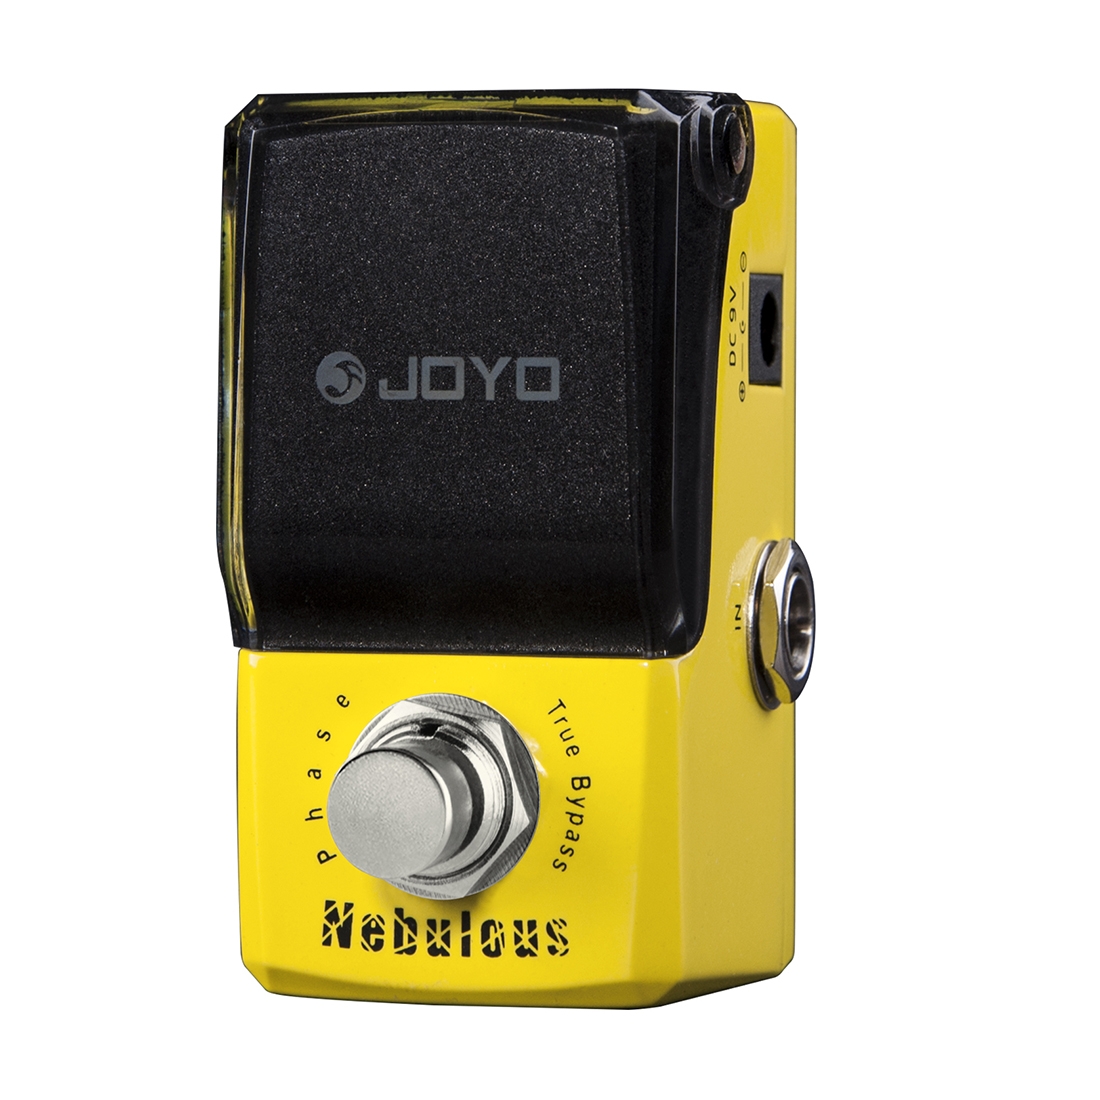 JOYO JF-328 Nebulous Classic Analogue Phaser Effect Guitar Pedal True Bypass Design Mini Phase Effect Pedal Music Instruments